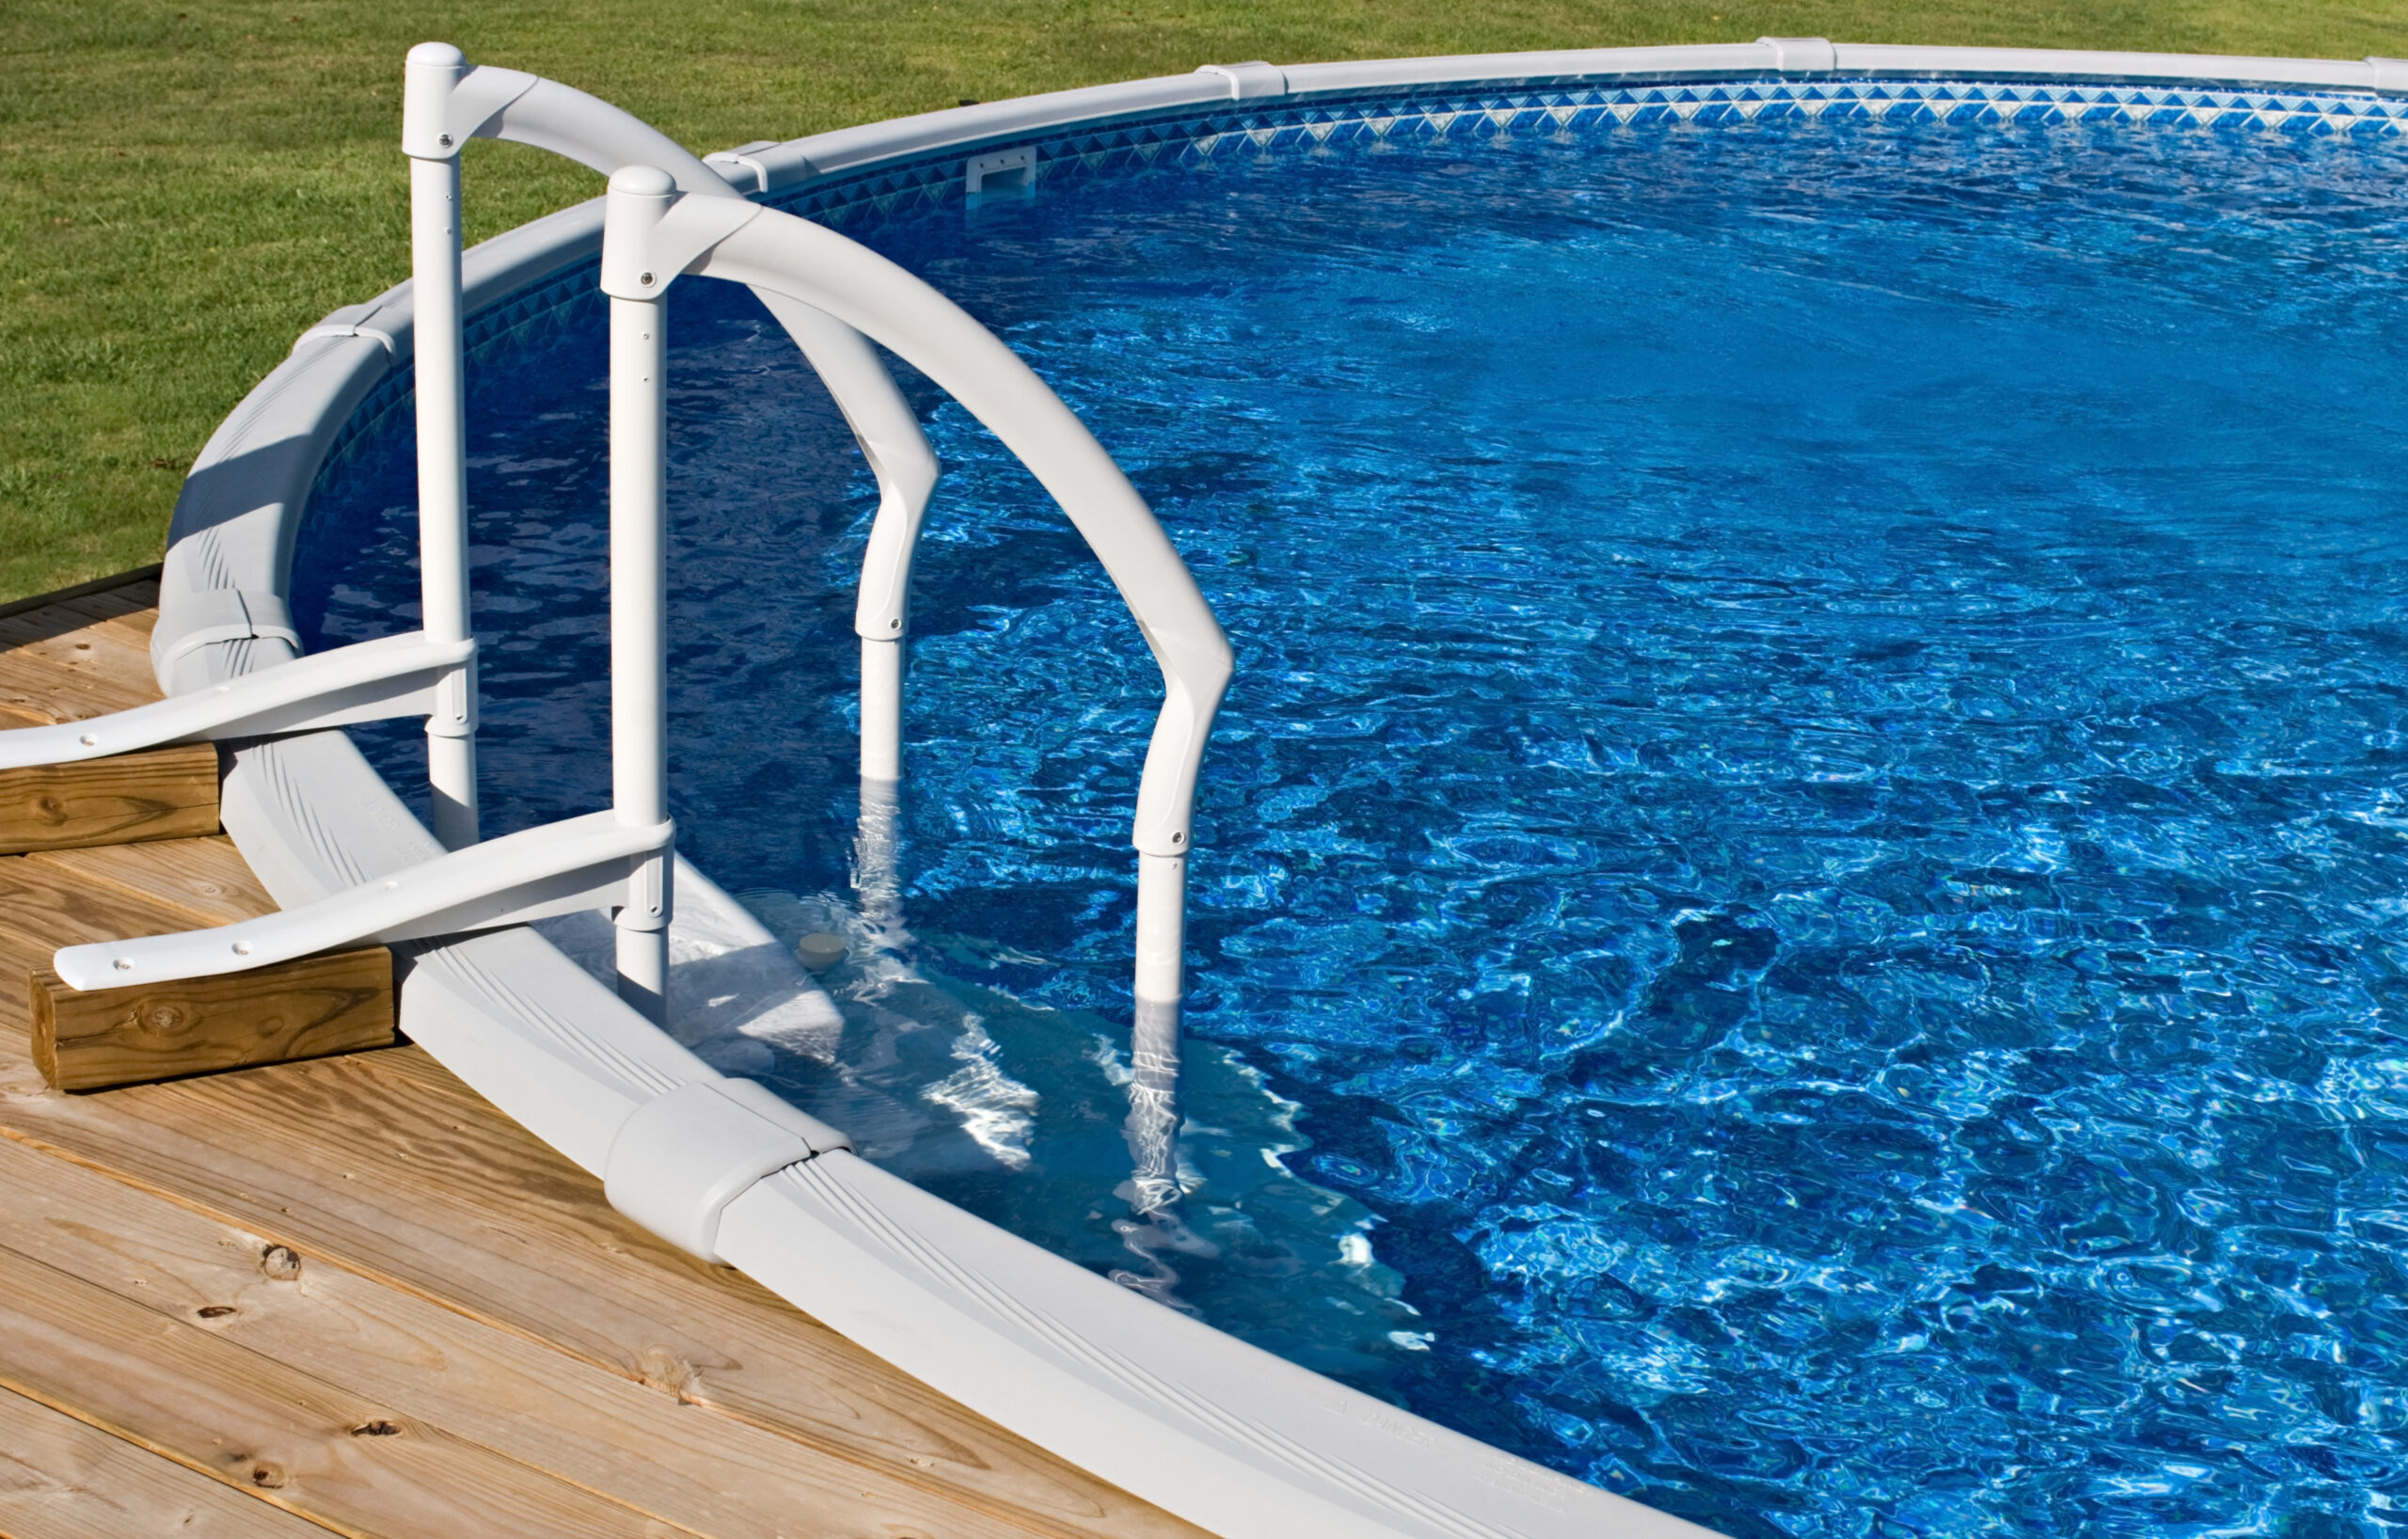 An inground pool, a permanent swimming pool structure that is installed below ground level, typically with a smooth surface and various depths for swimming.